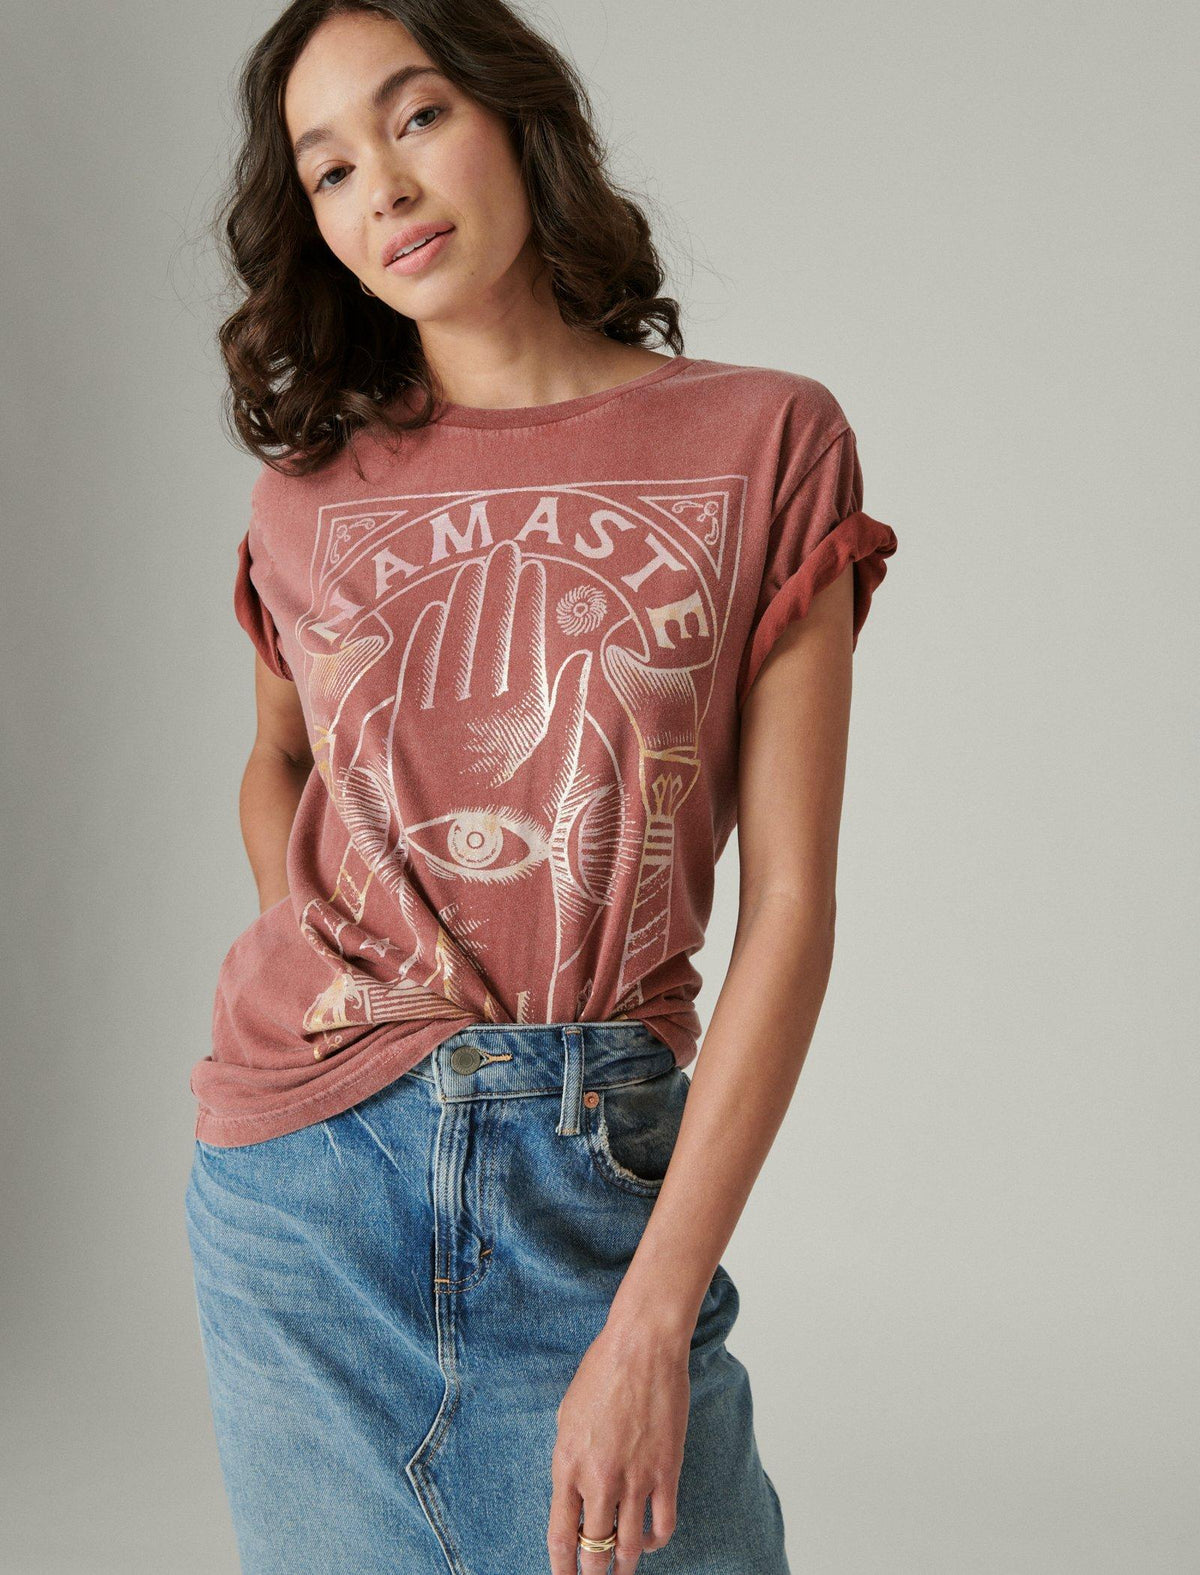 Lucky Brand Light Within Boyfriend Tee - Women's Clothing Tops Shirts Tee Graphic T Shirts Apple Butter